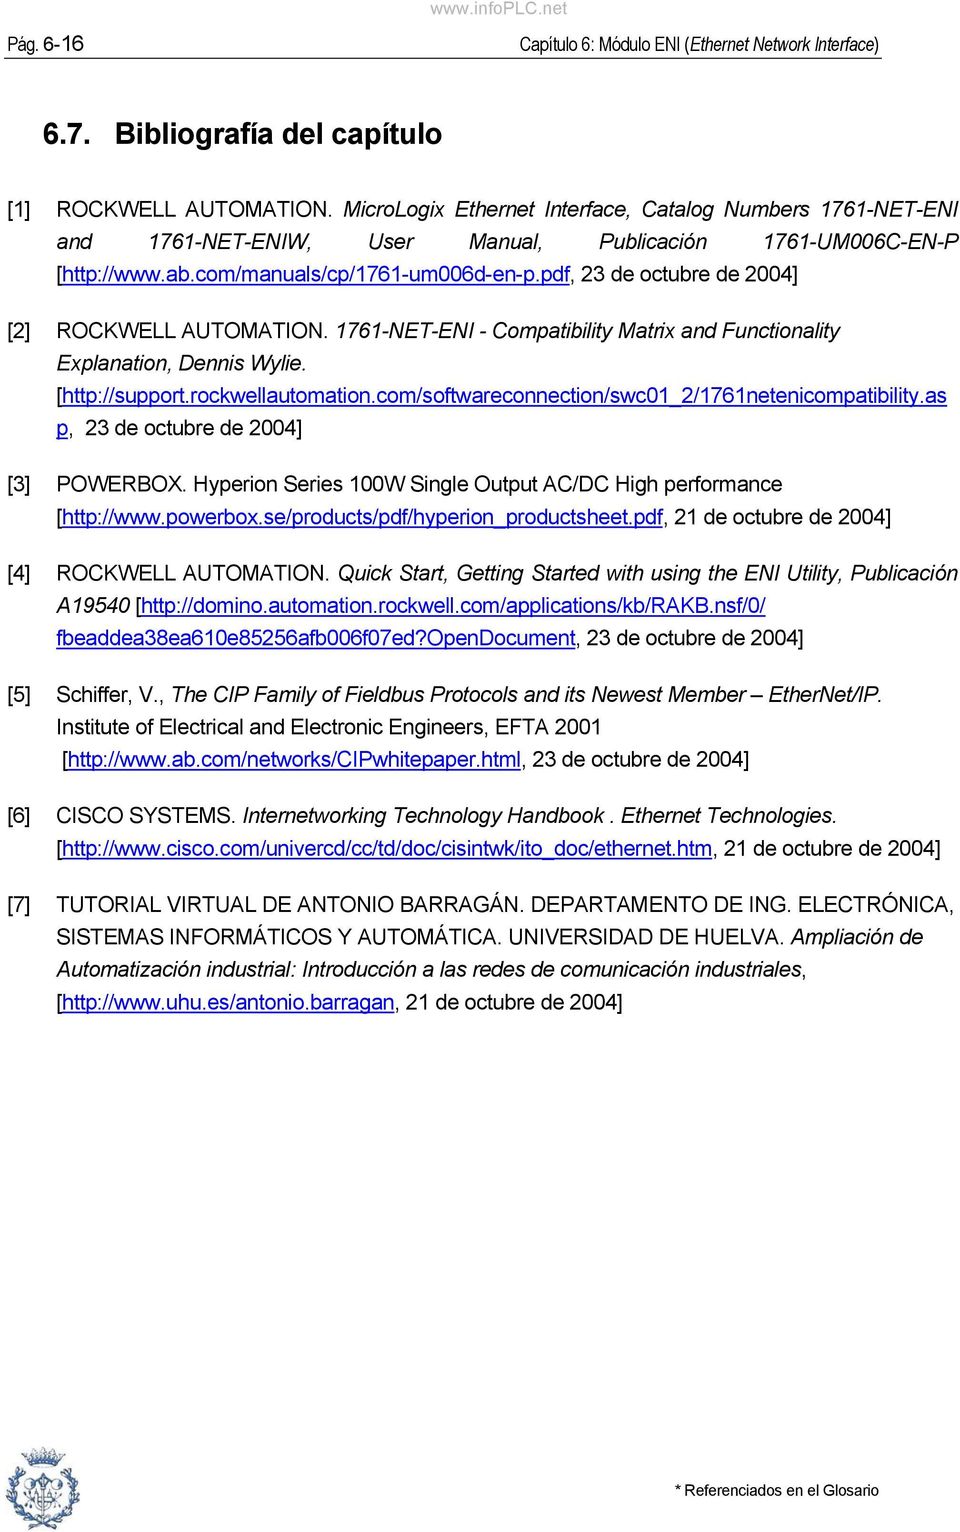 pdf, 23 de octubre de 2004] [2] ROCKWELL AUTOMATION. 1761-NET-ENI - Compatibility Matrix and Functionality Explanation, Dennis Wylie. [http://support.rockwellautomation.